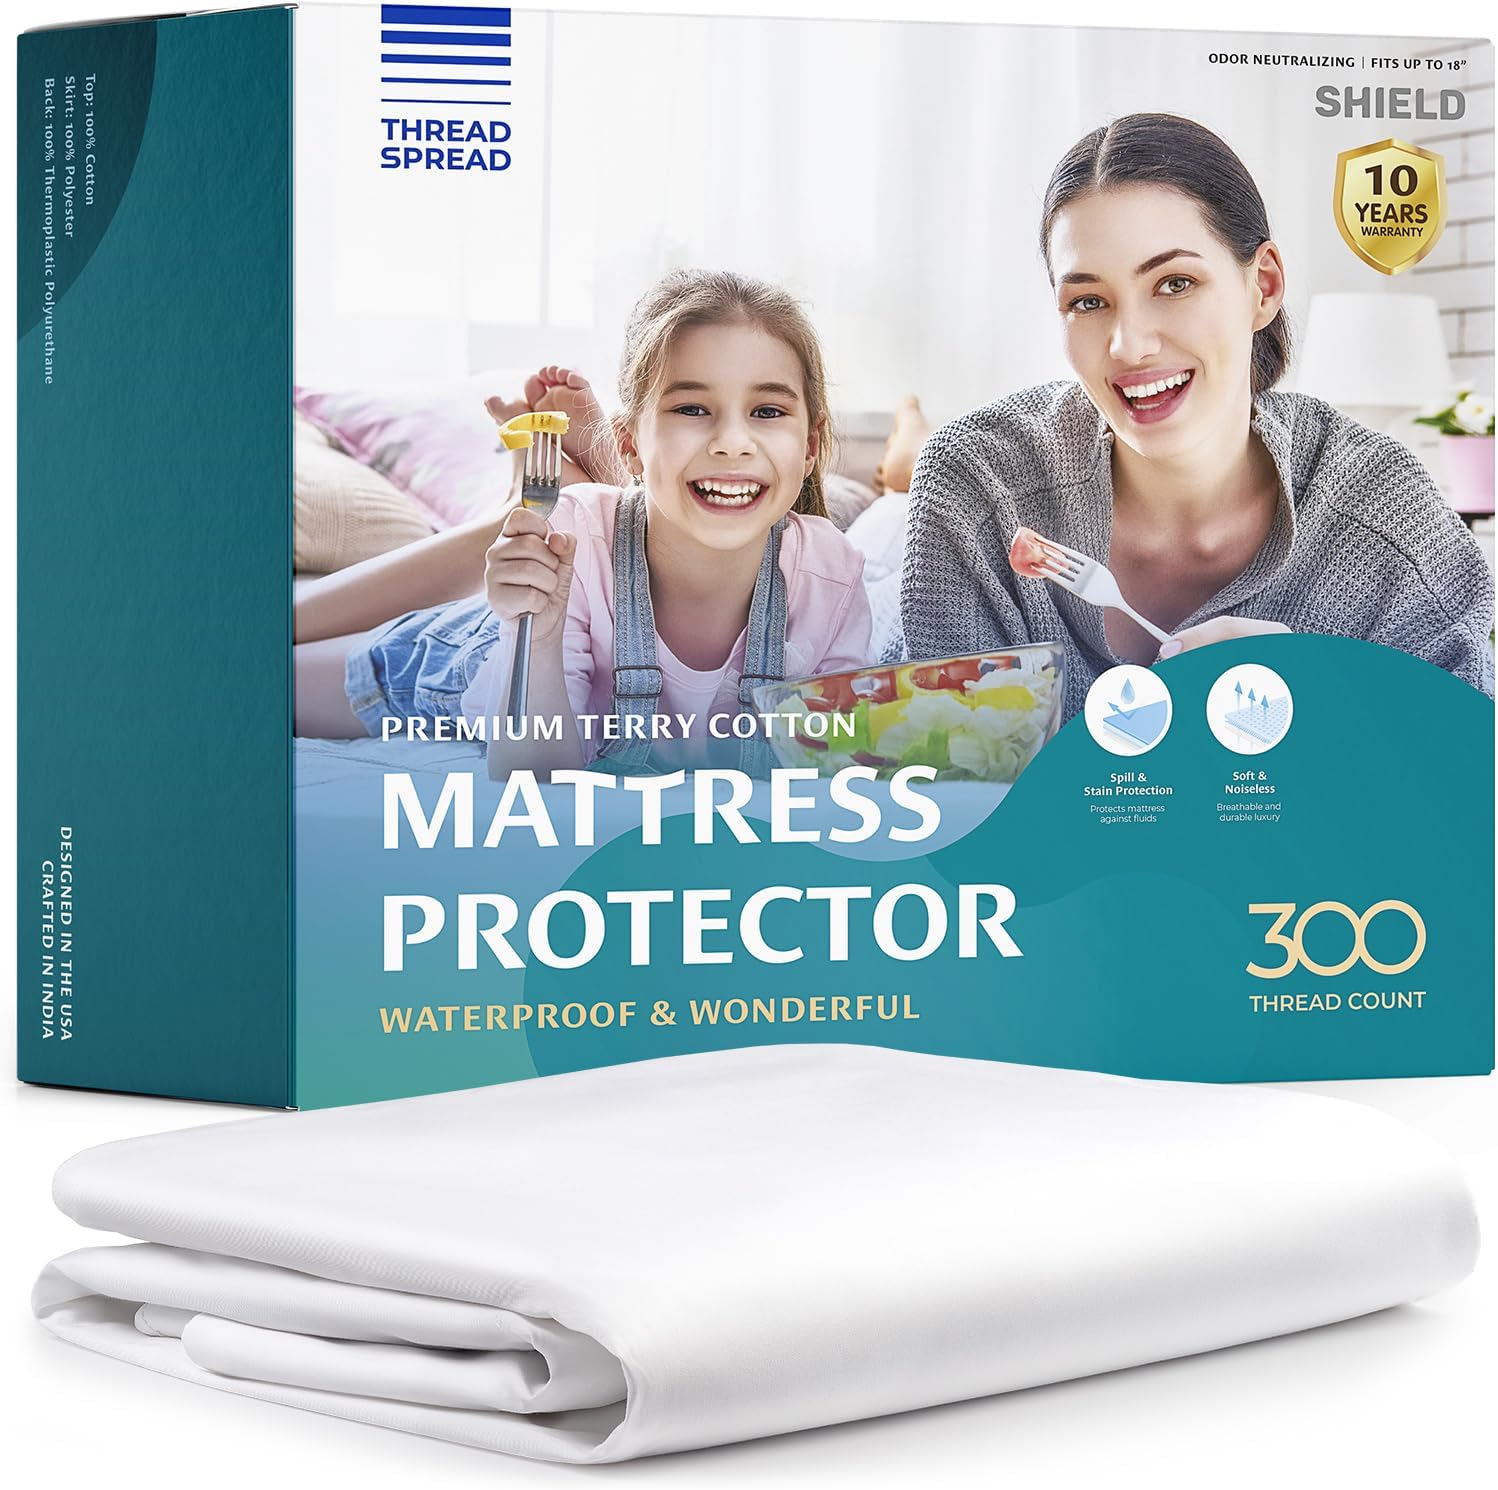 Premium Waterproof Mattress Protector for Queen Size Bed, Cooling Soft Cotton Top, Noiseless, Machine Washable, Fitted Mattress Cover with Deep Pockets to fit 8-18 inch Mattress (Queen 60 x 80)